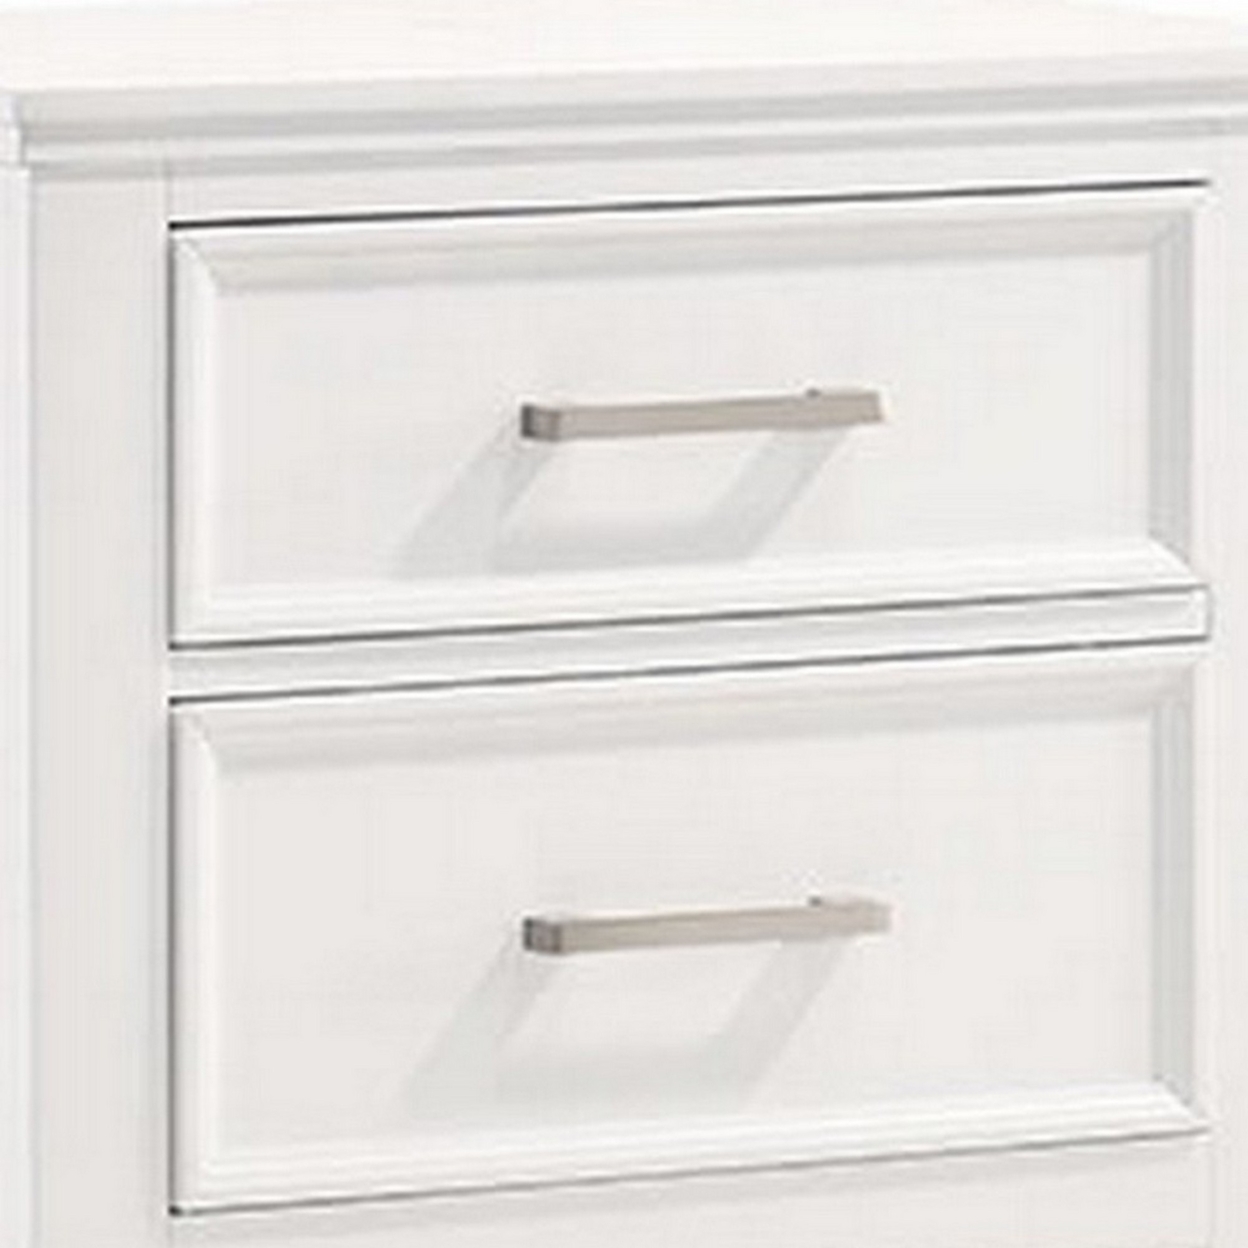 2 Drawer Wooden Nightstand With Chamfered Legs And Molded Details, White- Saltoro Sherpi